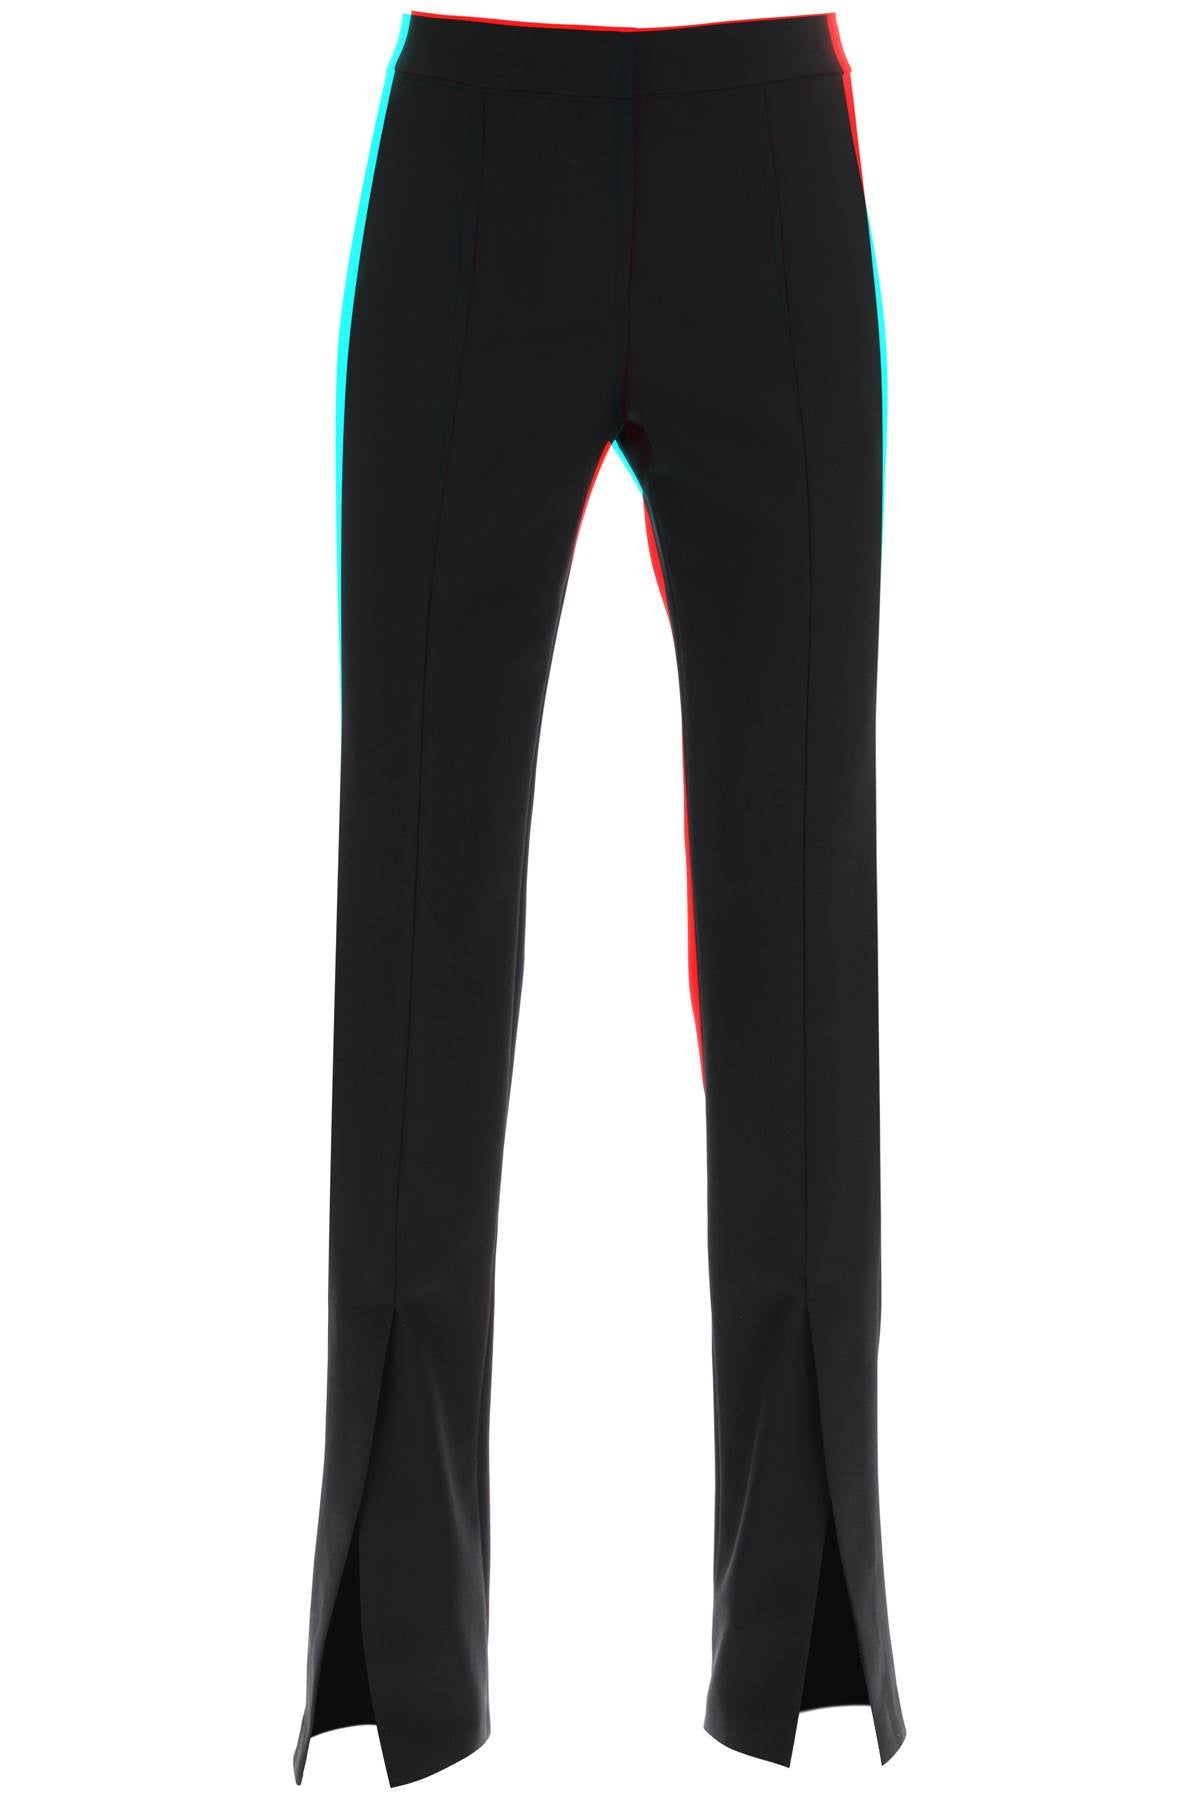 OFF-WHITE Black Tech Drill Slim Fit Pants for Women - FW23 Collection